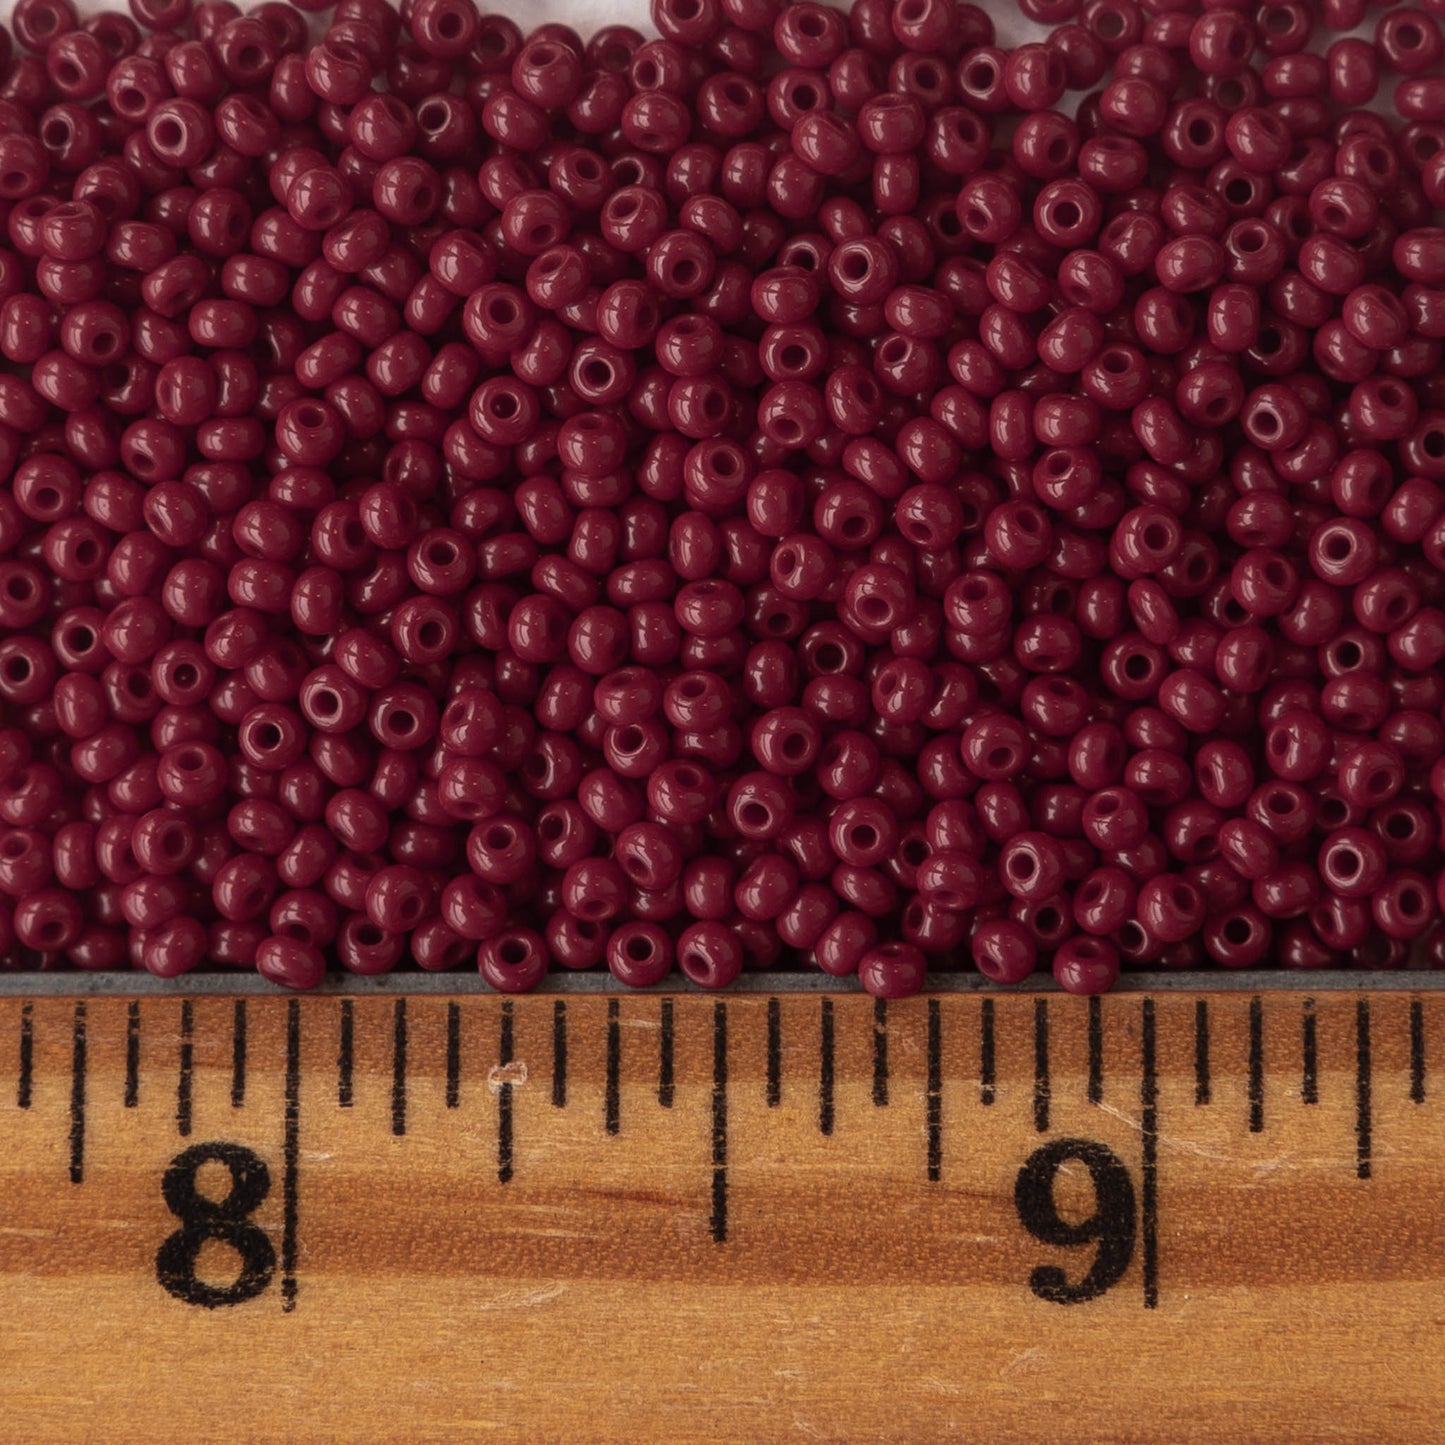 11/0 Seed Beads - Opaque Dark Red - 24 gram Tube